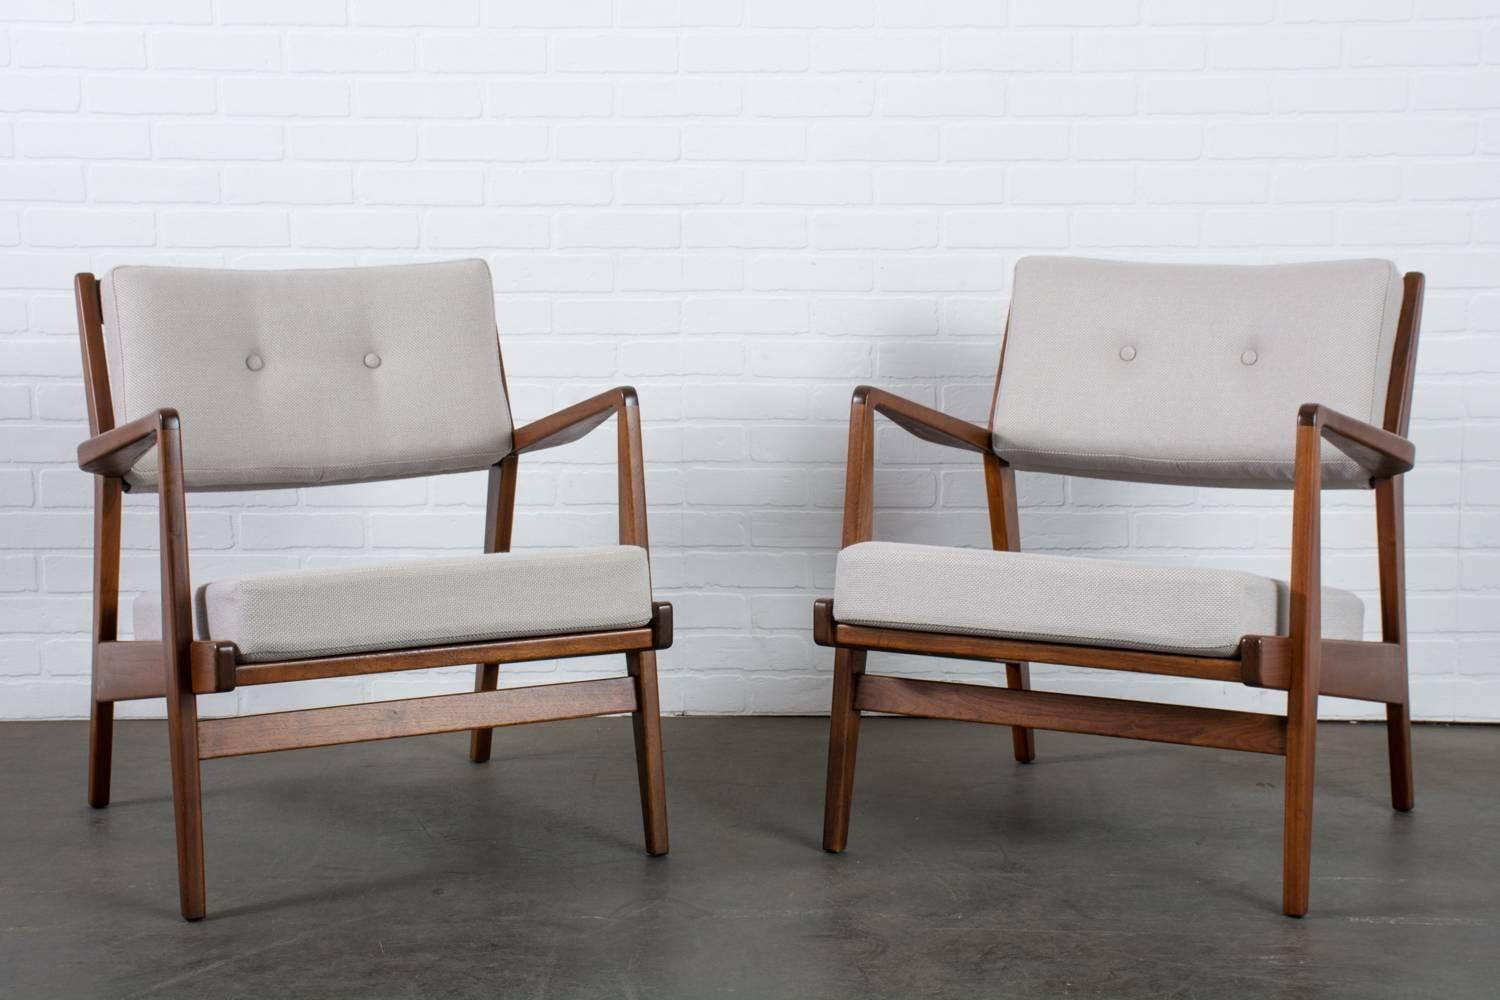 This is a pair of Mid-Century Modern lounge chairs by Jens Risom for Jens Risom Design (model U4230). These vintage chairs have walnut frames and have been professionally reupholstered in a silver grey fabric. Jens Risom label under the seat.